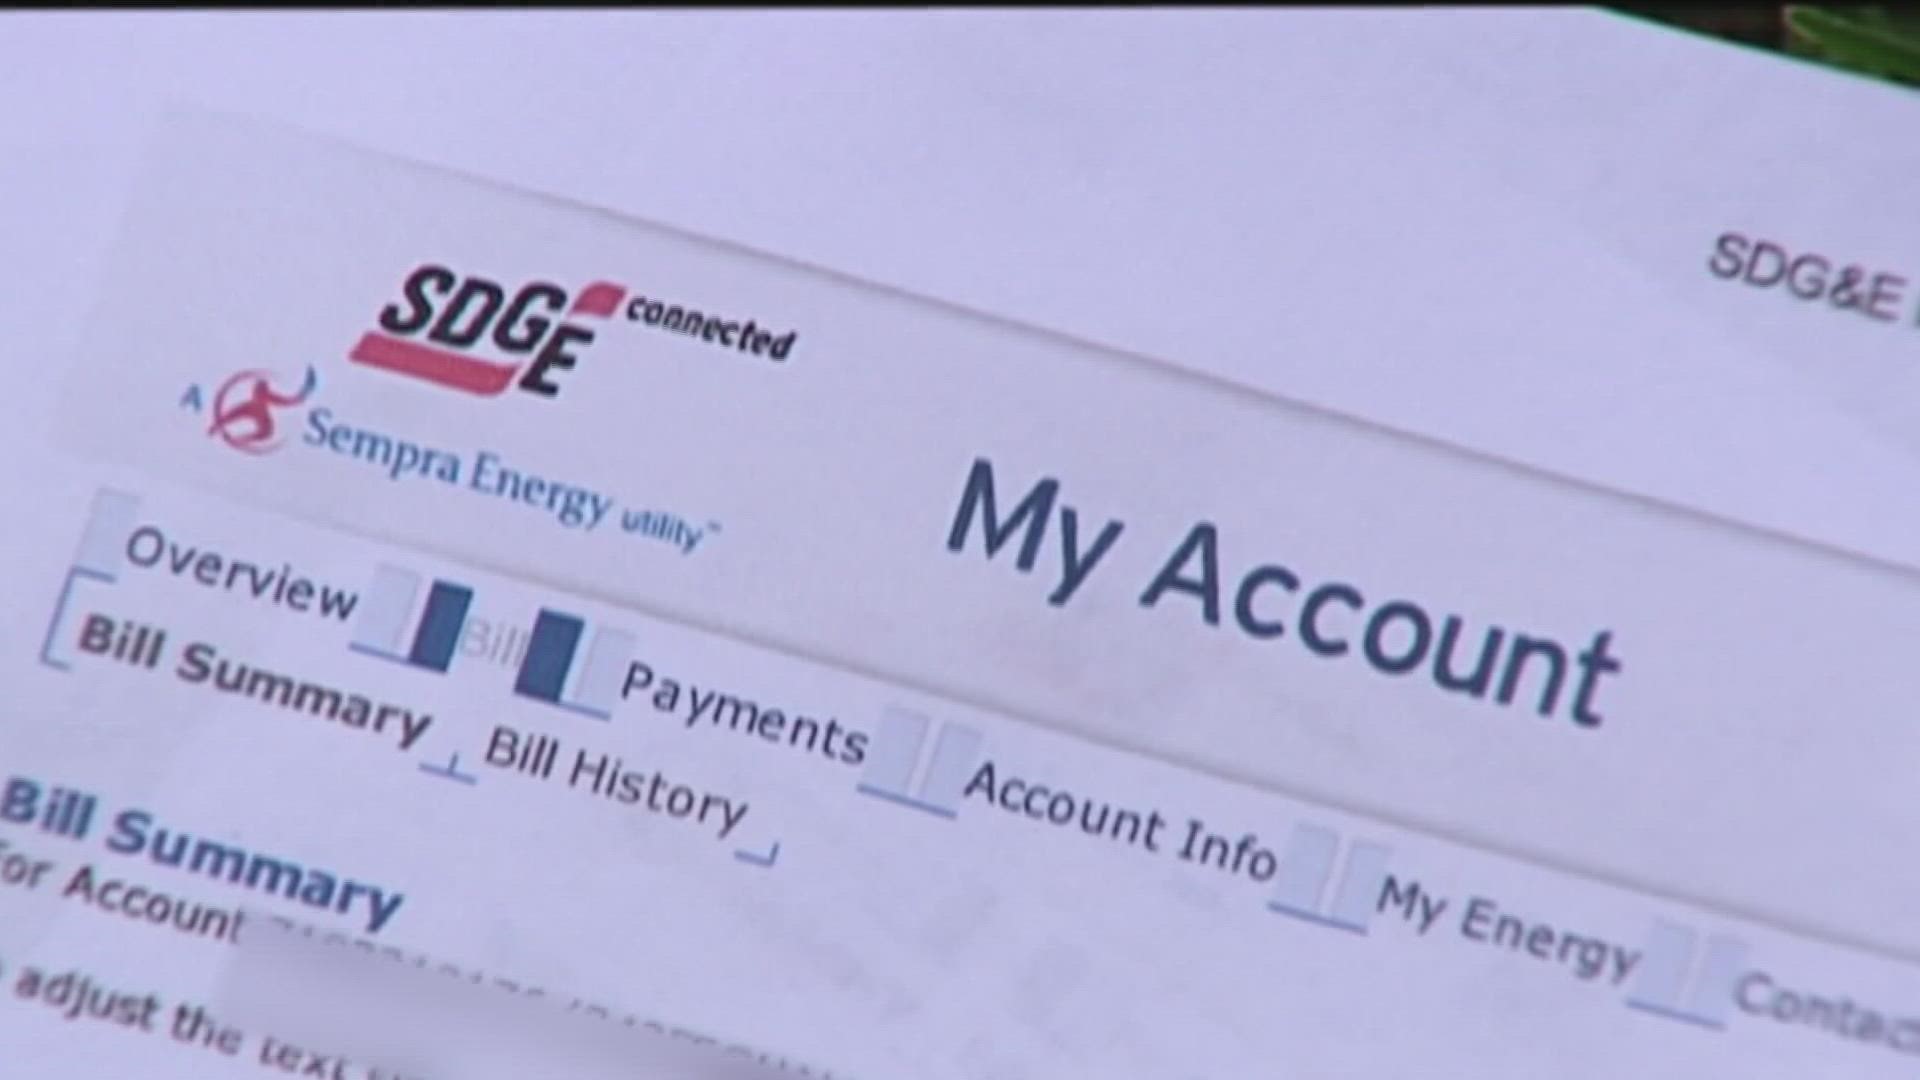 SDG&E is sending direct emails to customers this week so they can plan accordingly as all utility costs rise.